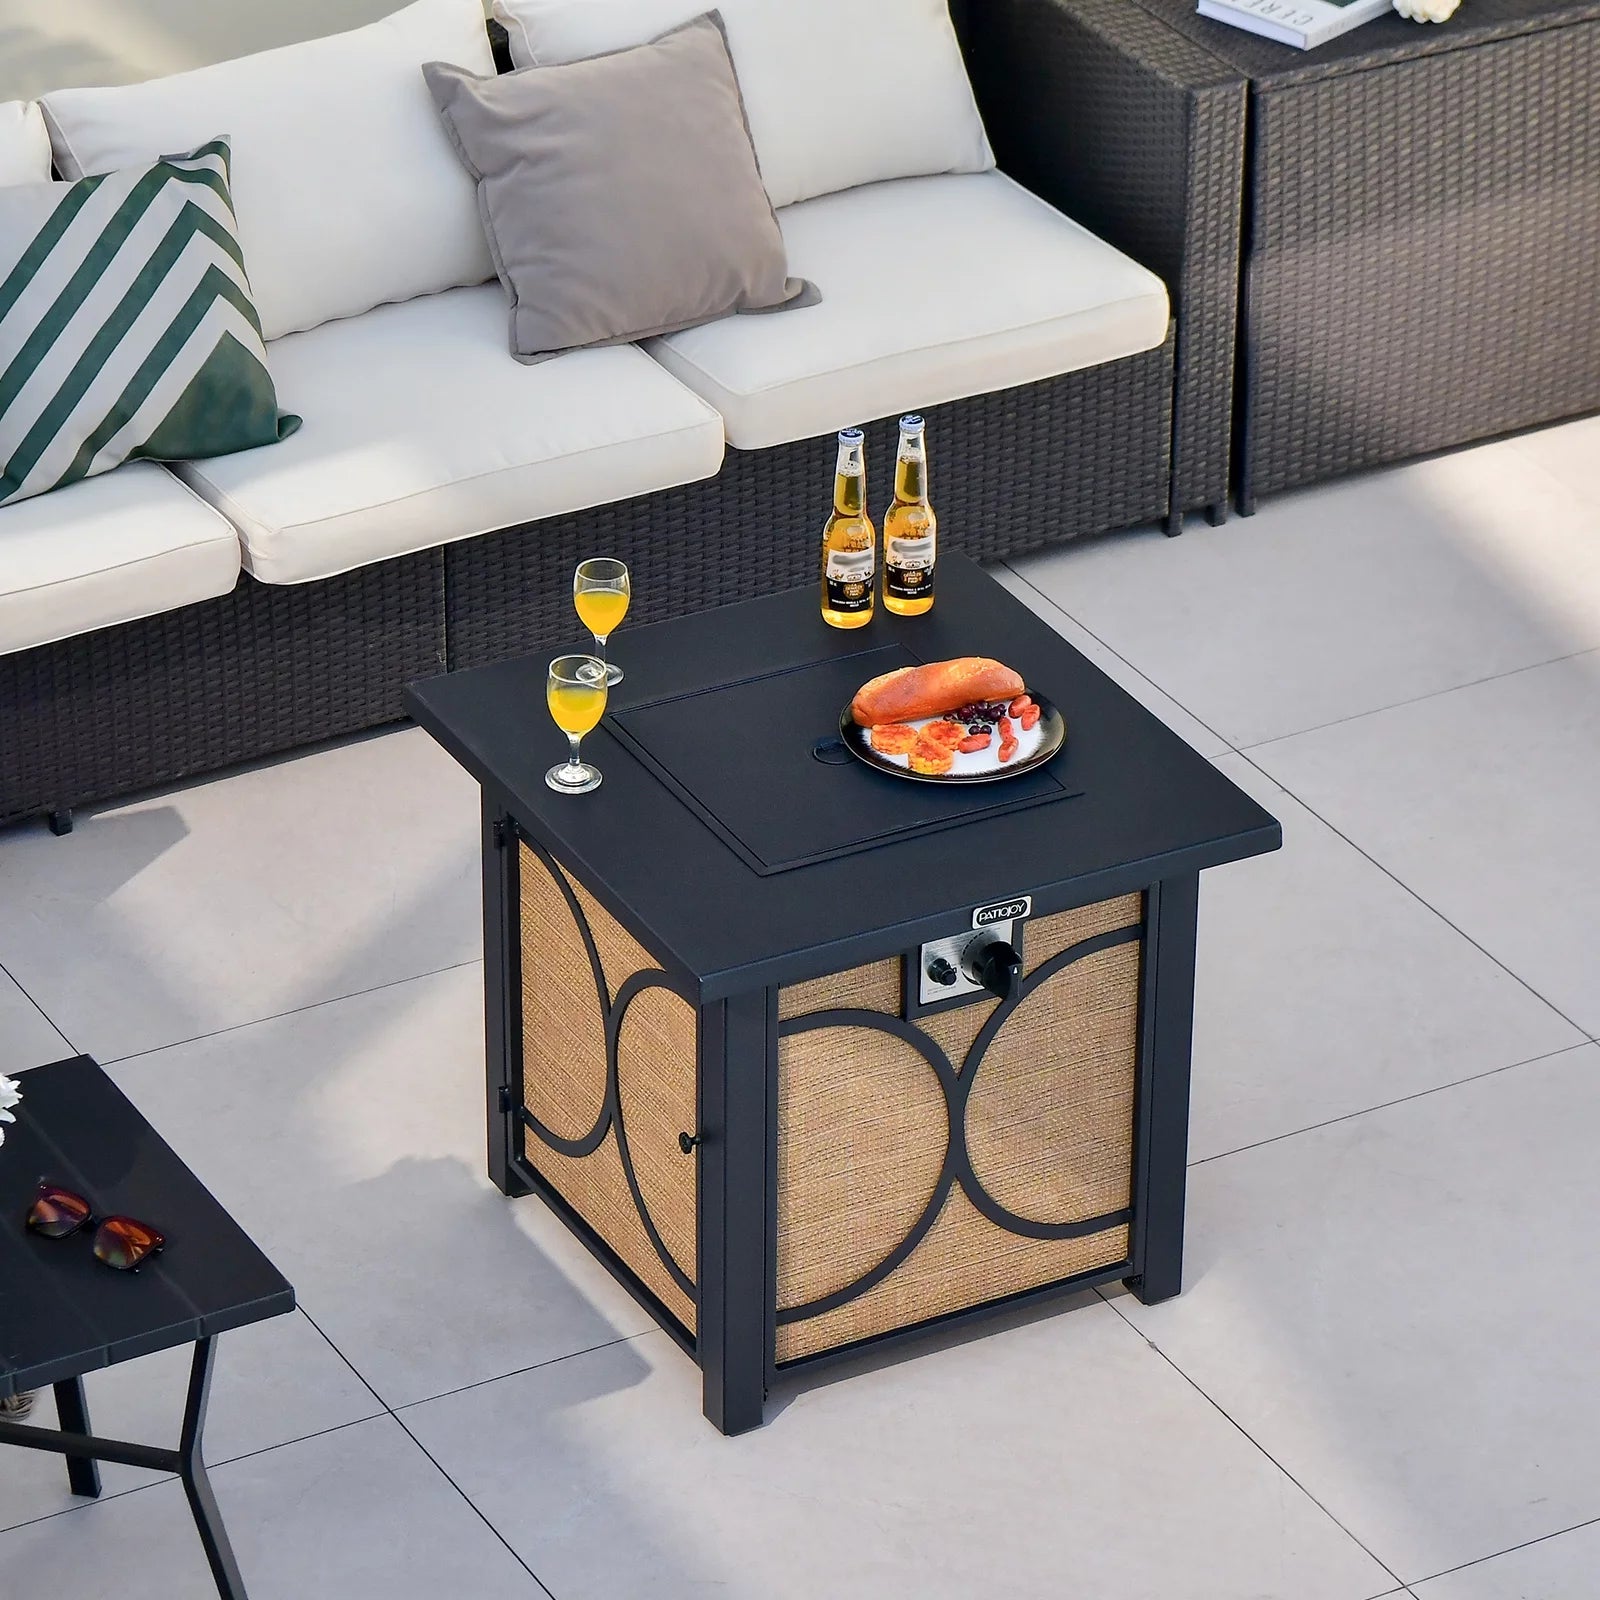 28 Inch Outdoor Square Fire Pit Table 50,000 BTU Propane Gas Fire Table W/ Fire Glasses & PVC Protective Cover